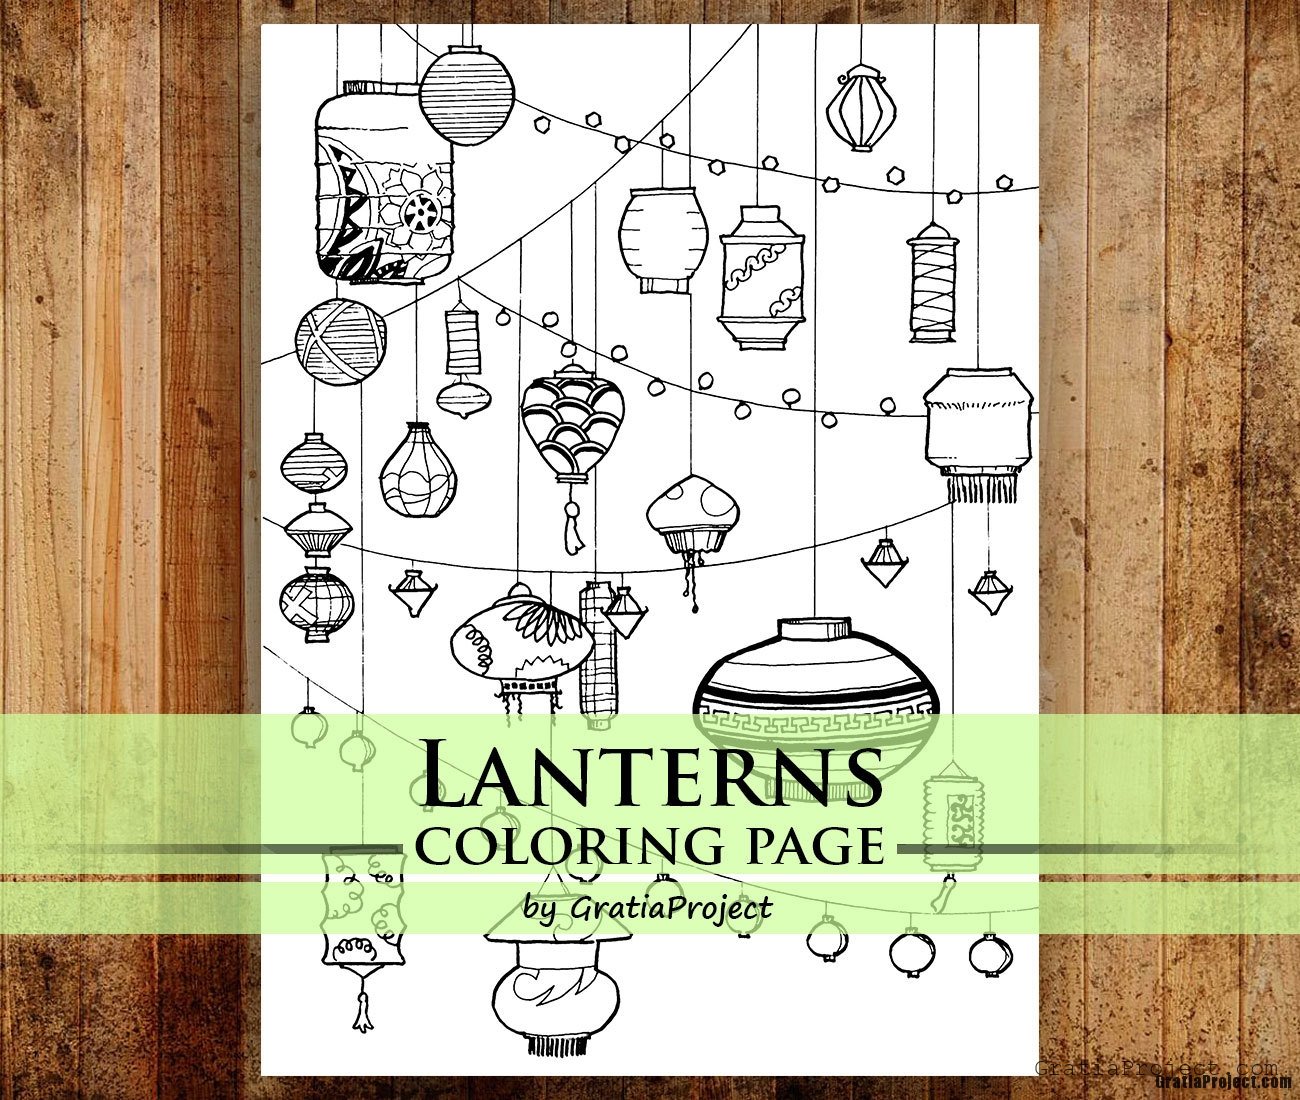 Lanterns Coloring Page, Adult Coloring Pages, Relaxation, Digital Coloring, Art Therapy, Printable Coloring